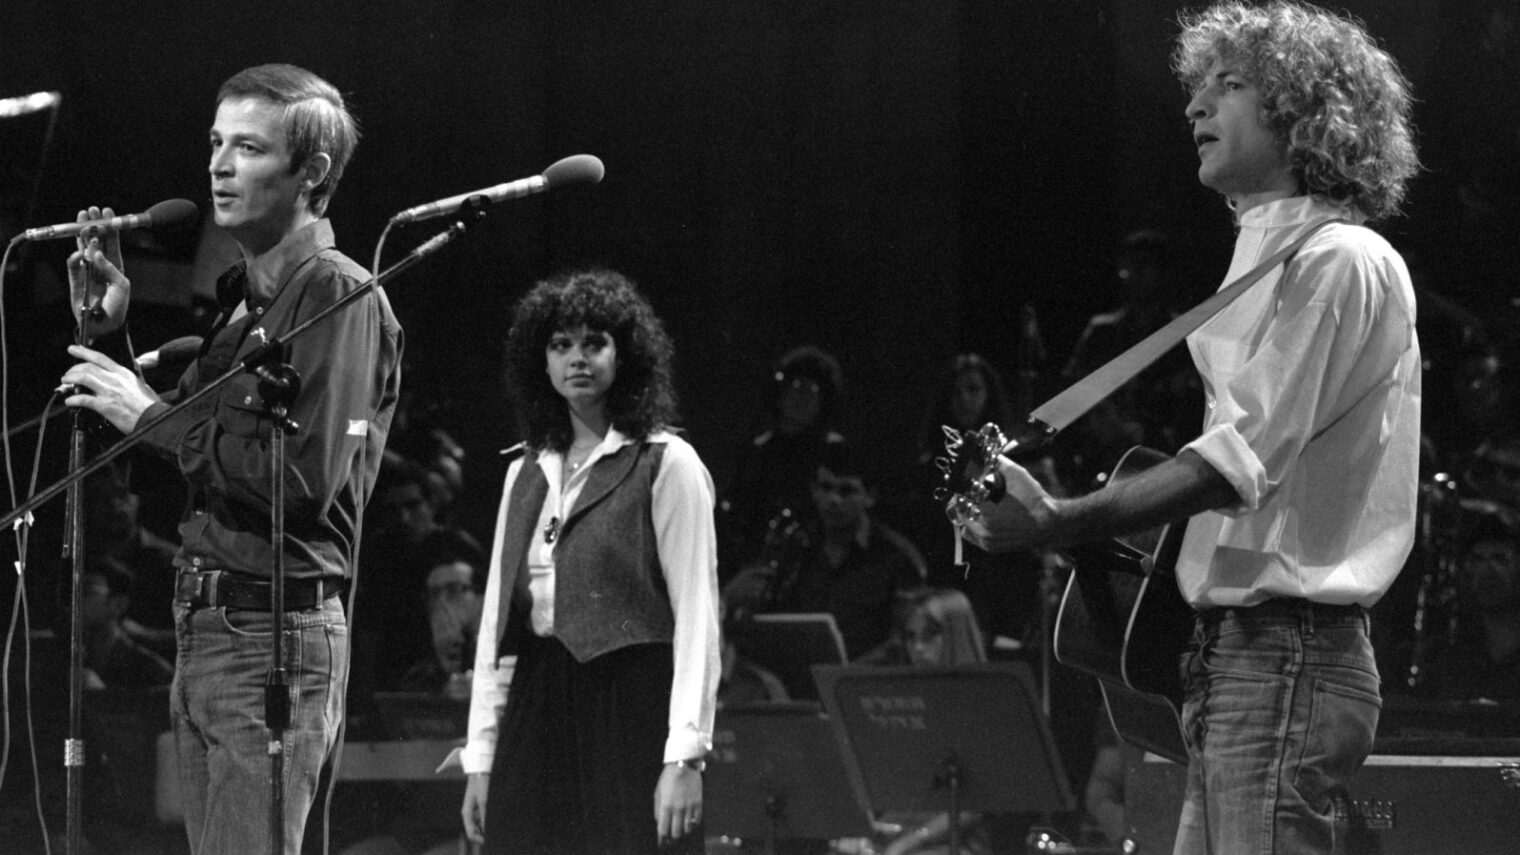 From left, Israeli musicians Arik Einstein, Dafna Armoni and Shalom Hanoch in performance, 1979. Photo by Government Press Office via Wikipedia